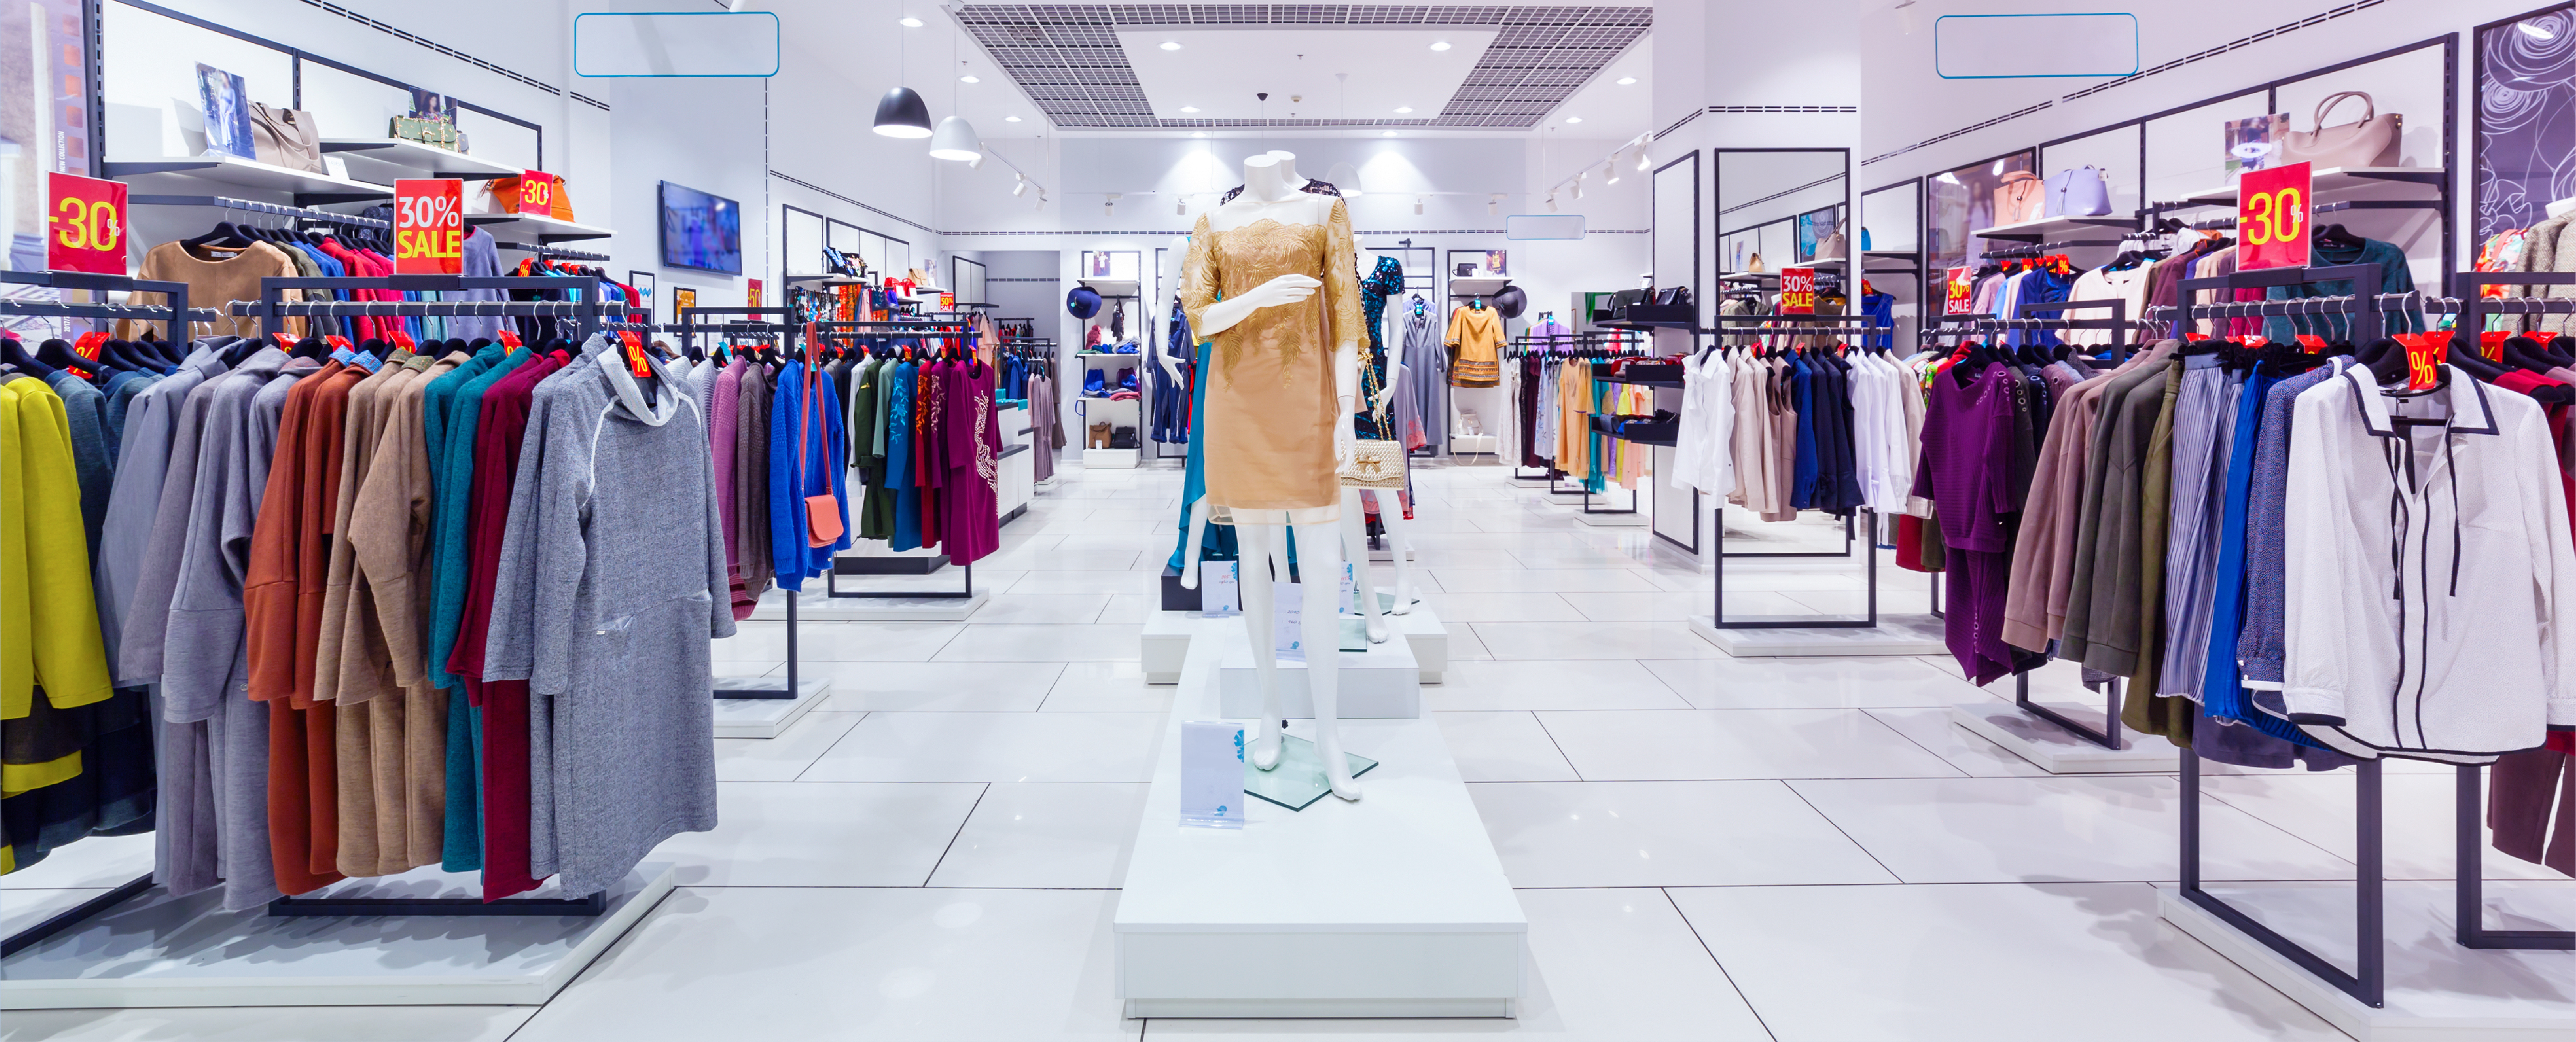 How Retailers Can Protect Themselves from Organized Retail Crime